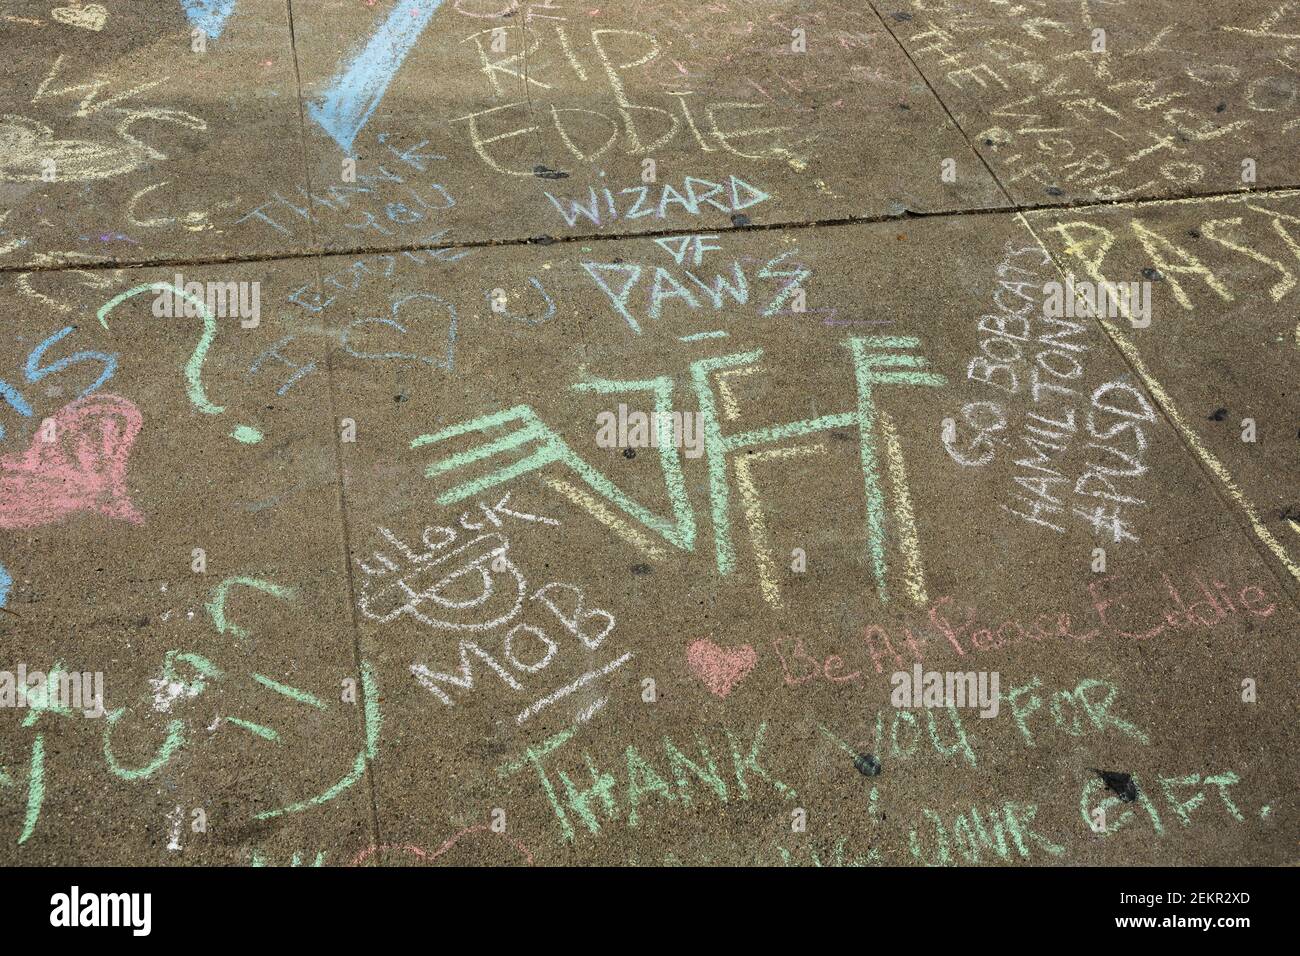 Sidewalk memorial for Eddie Van Halen who died earlier this week from complications of cancer. Eddie Van Halen was the founding member of the rock group Van Halen. He scrawled ÒVan HalenÓ on a sidewalk near his Pasadena childhood home when he was a teenager. 10/9/2020 Pasadena, CA USA (Photo by Ted Soqui/SIPA USA)  Stock Photo